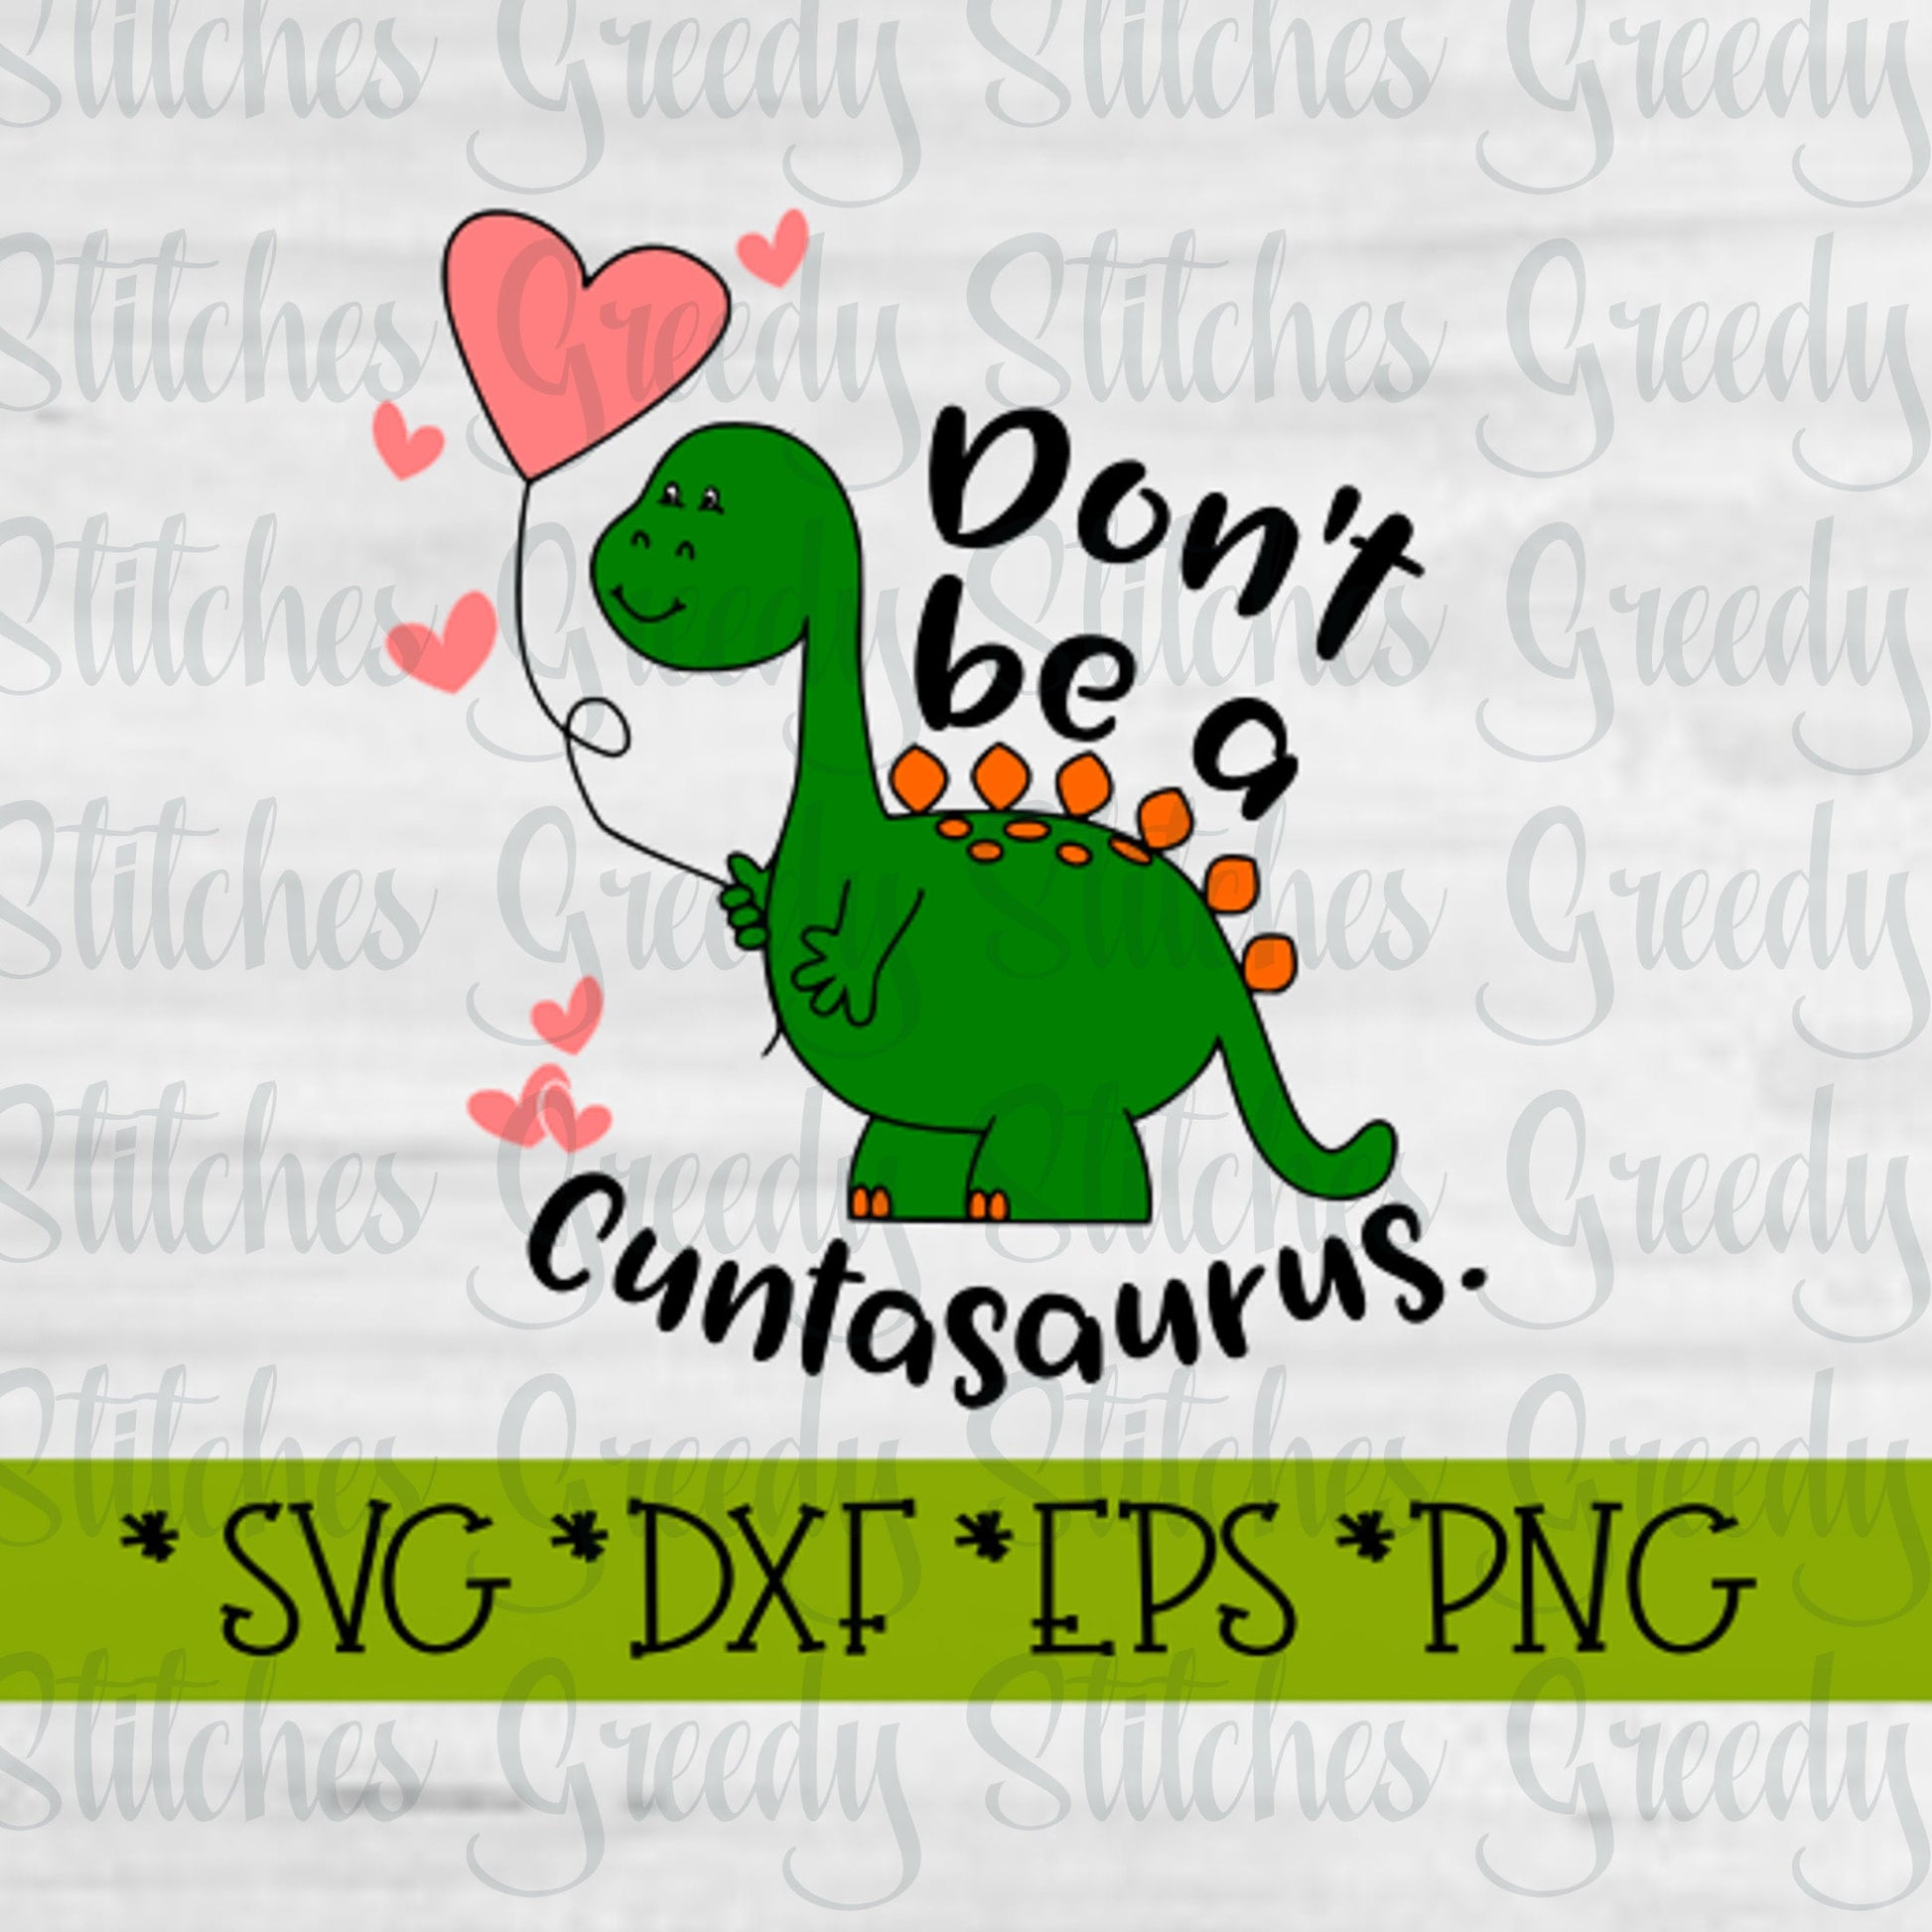 Don&#39;t Be A C#ntasaurus SvG, DxF, EpS, PnG, JpG.  Twat SvG | Cuntasaurus SvG | Dinosaur SvG | Cunt SvG | Instant Download Cut Files.